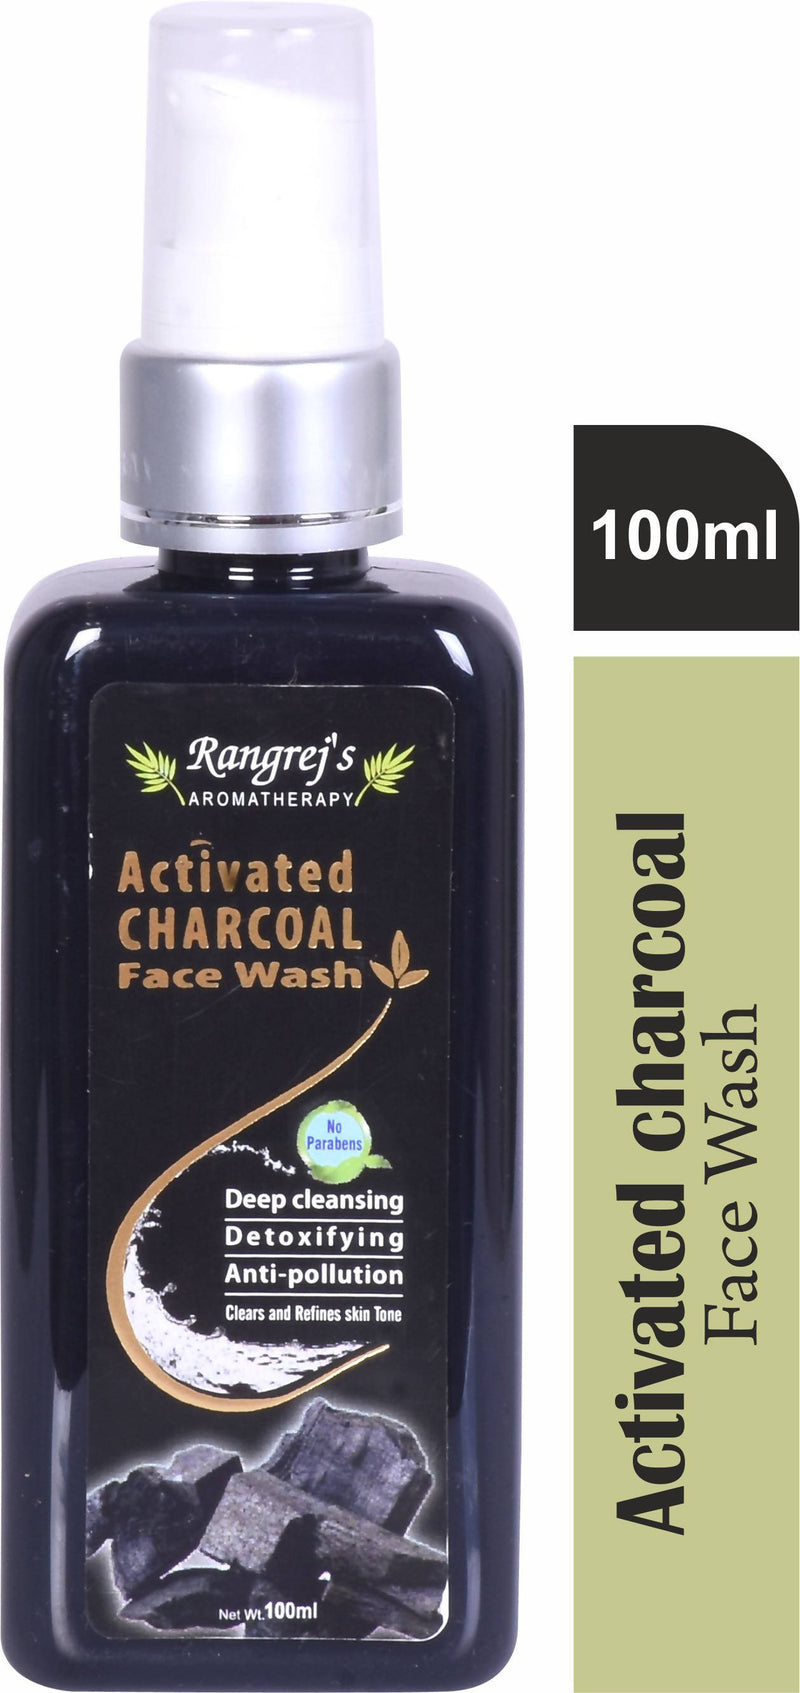 Rangrej's Aromatherapy Activated charcoal face wash